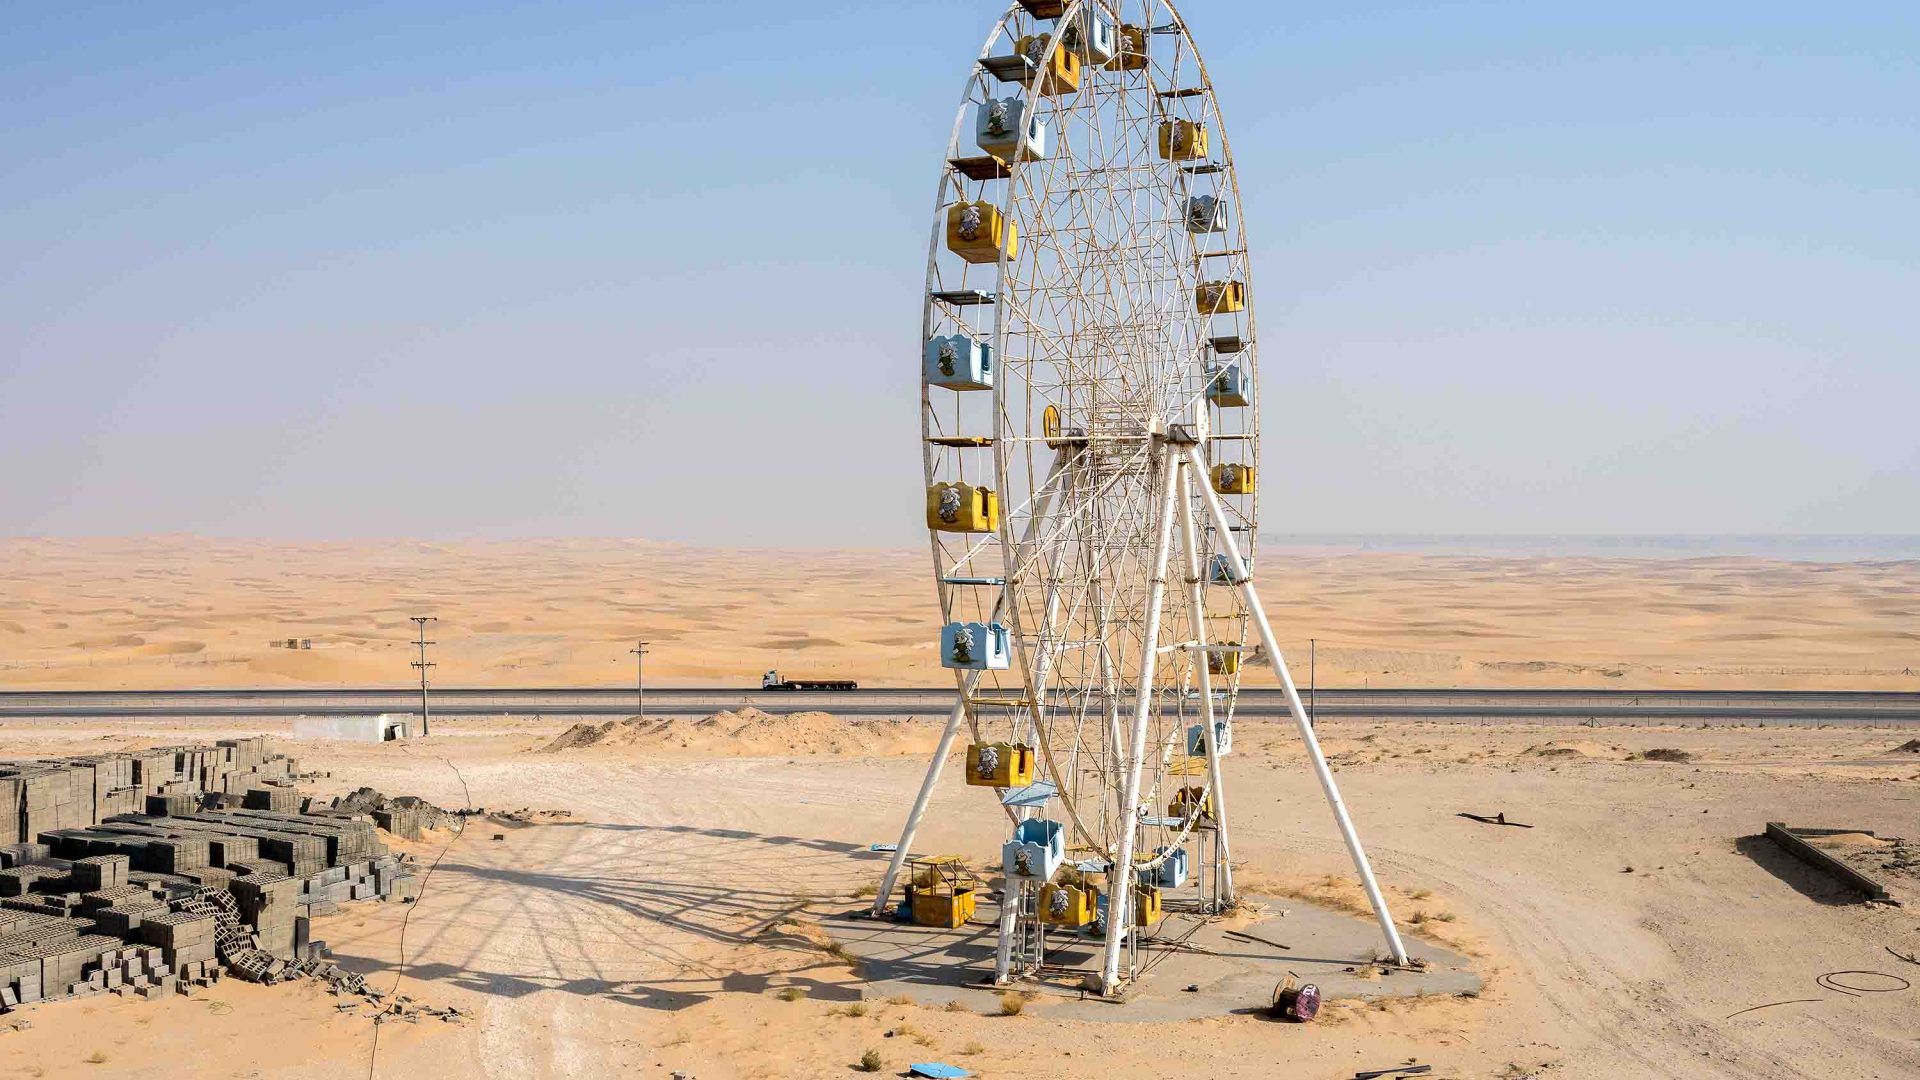 A ferris wheel stands in the desert with some buildings to its left.